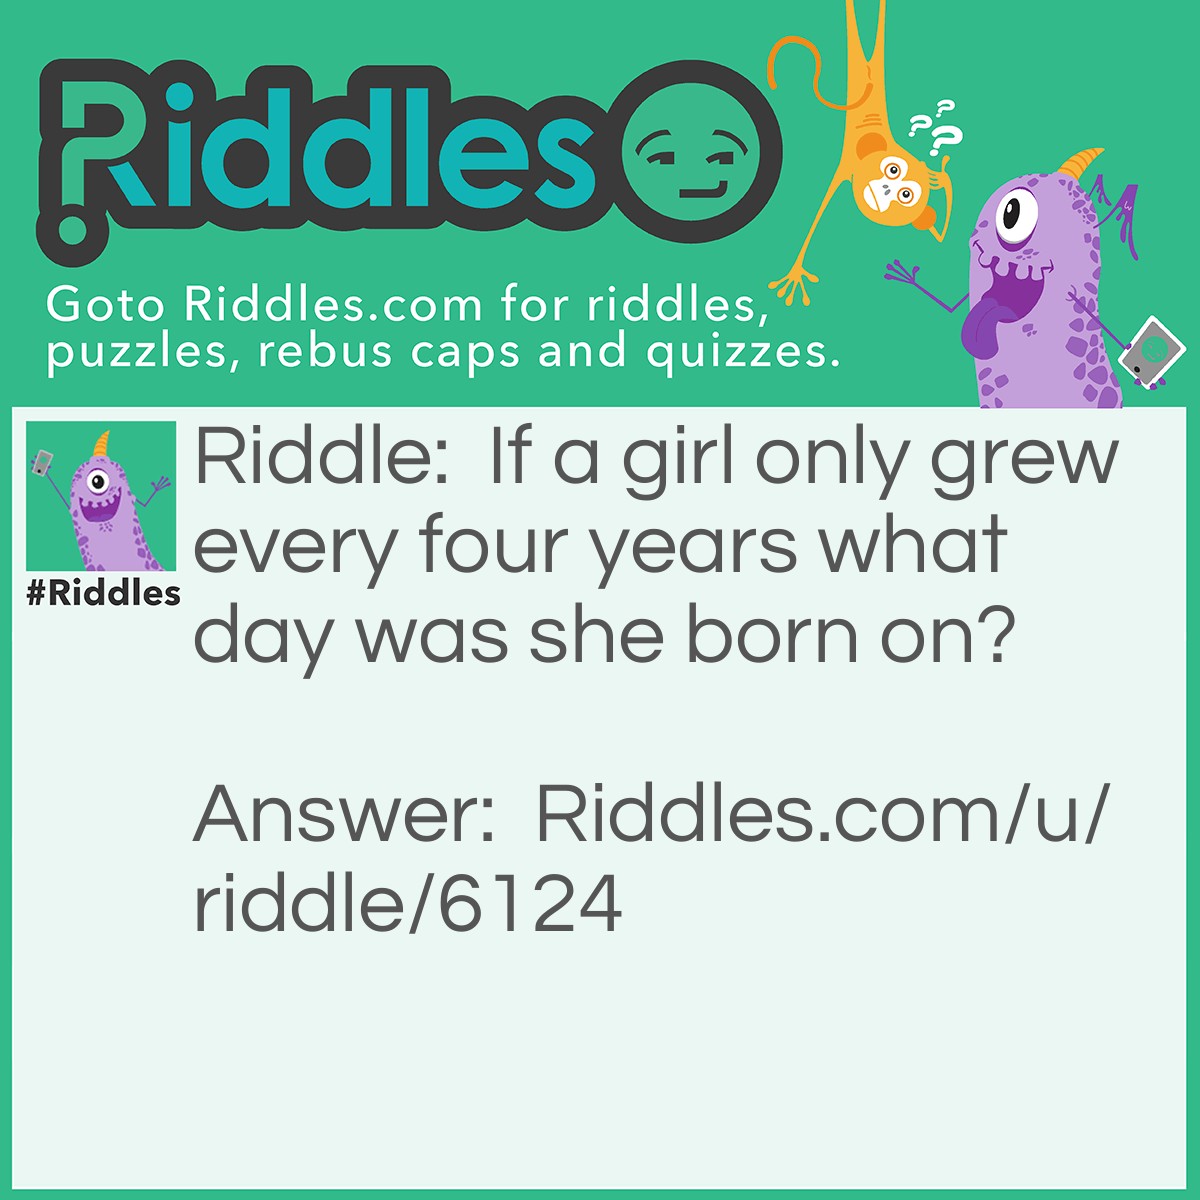 Riddle: If a girl only grew every four years what day was she born on? Answer: February 29, Leap year.